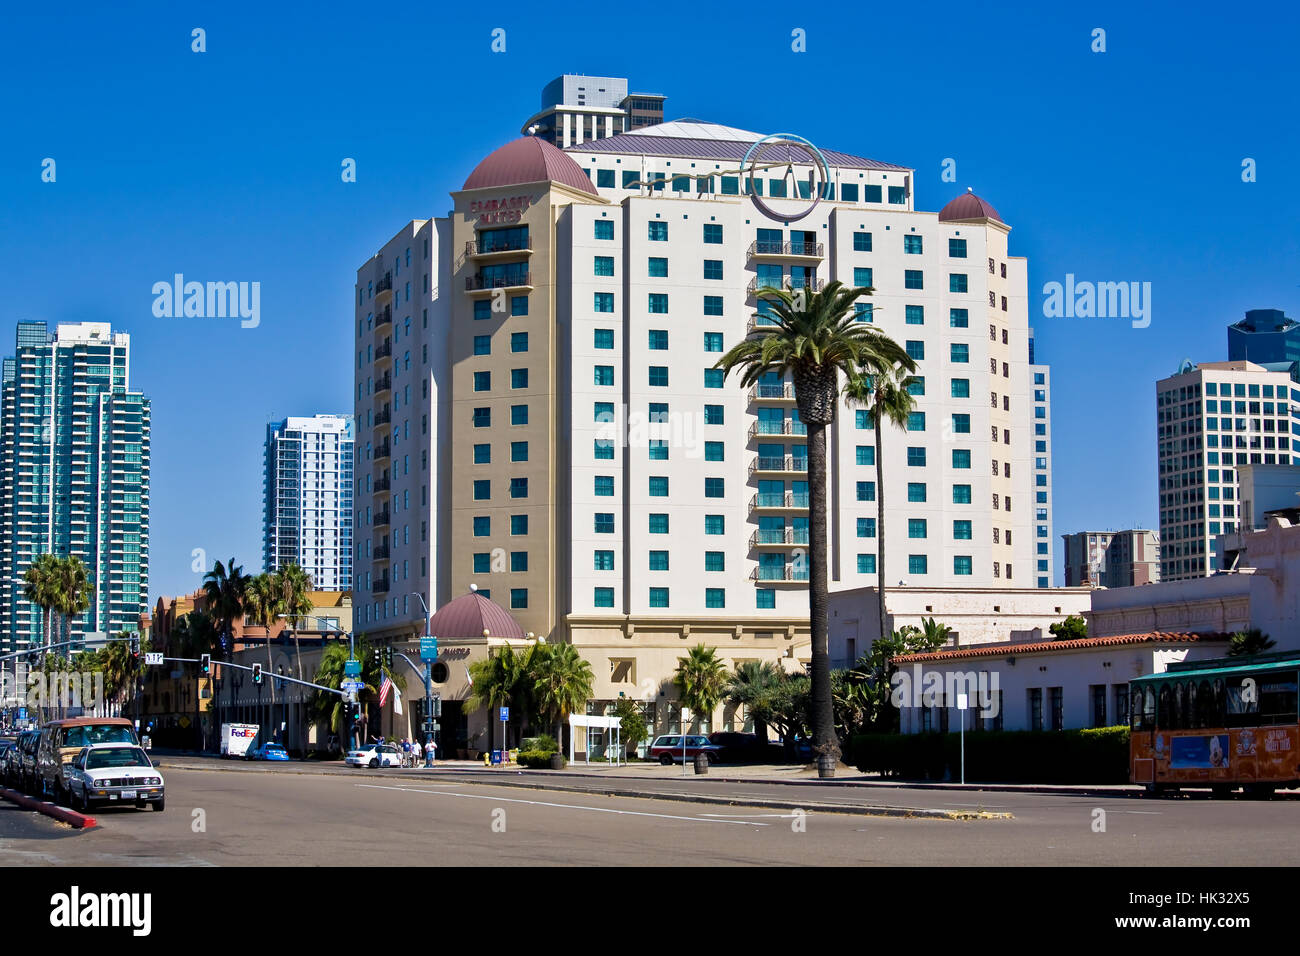 The Embassy Suites hotel, a block from the downtown San Diego waterfront on San Diego Bay, CA. Stock Photo